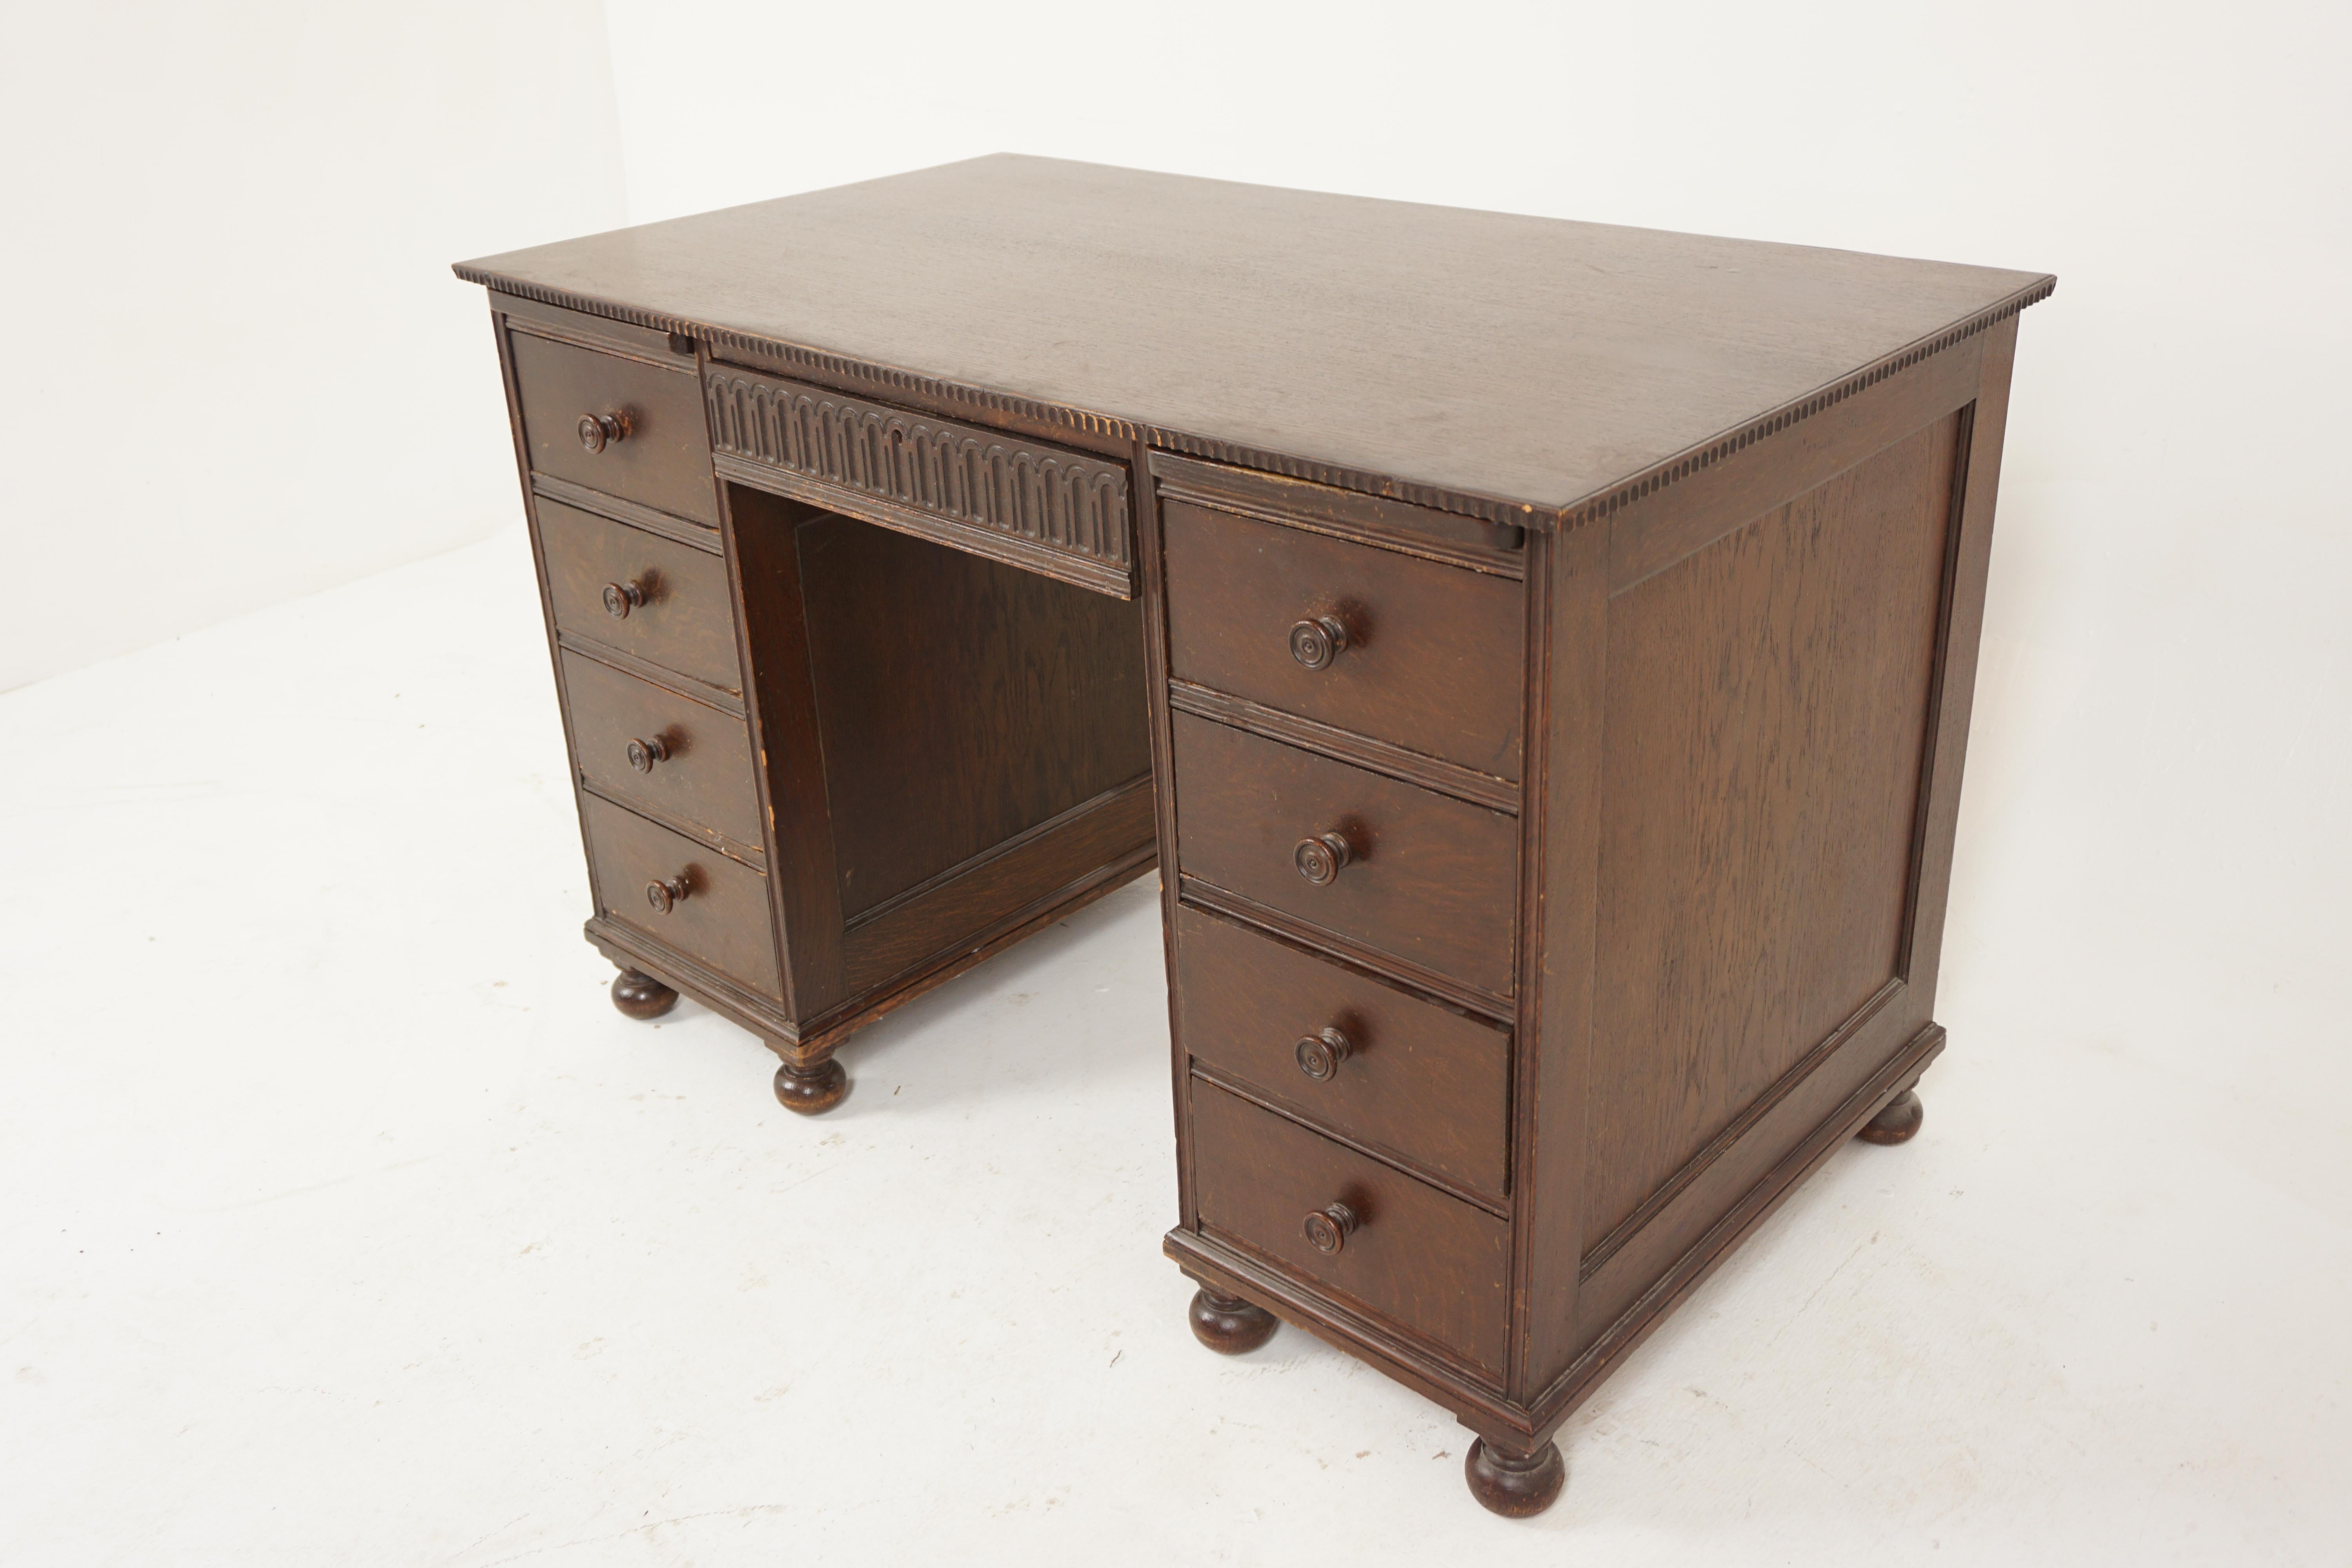 Vintage oak double pedestal desk, Scotland 1930, H350

Scotland 1930
Solid Oak
Original Finish
Rectangular Top with beaded moulding
Central drawer underneath
Flanked by pair of four drawer pedestals
All standing on bumfeet
Very clean and in good